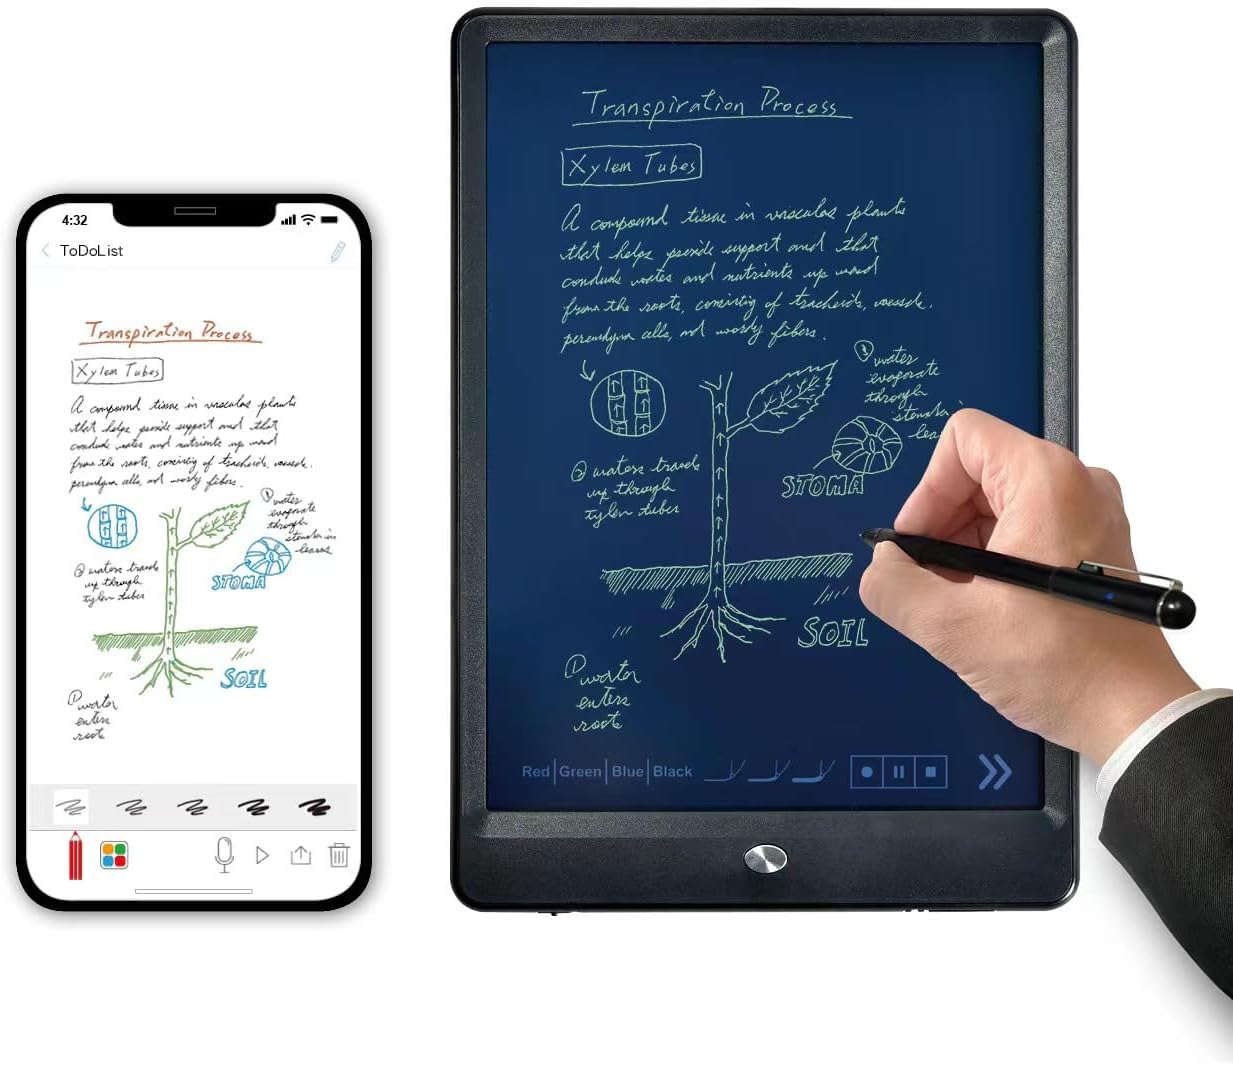 Ophaya Smart Digital Pen + Writing Tablet – GO PAPER LESS,Limitless Creativity,Eliminating Paper Waste, and Unlimited Usage for note taking and drawing.